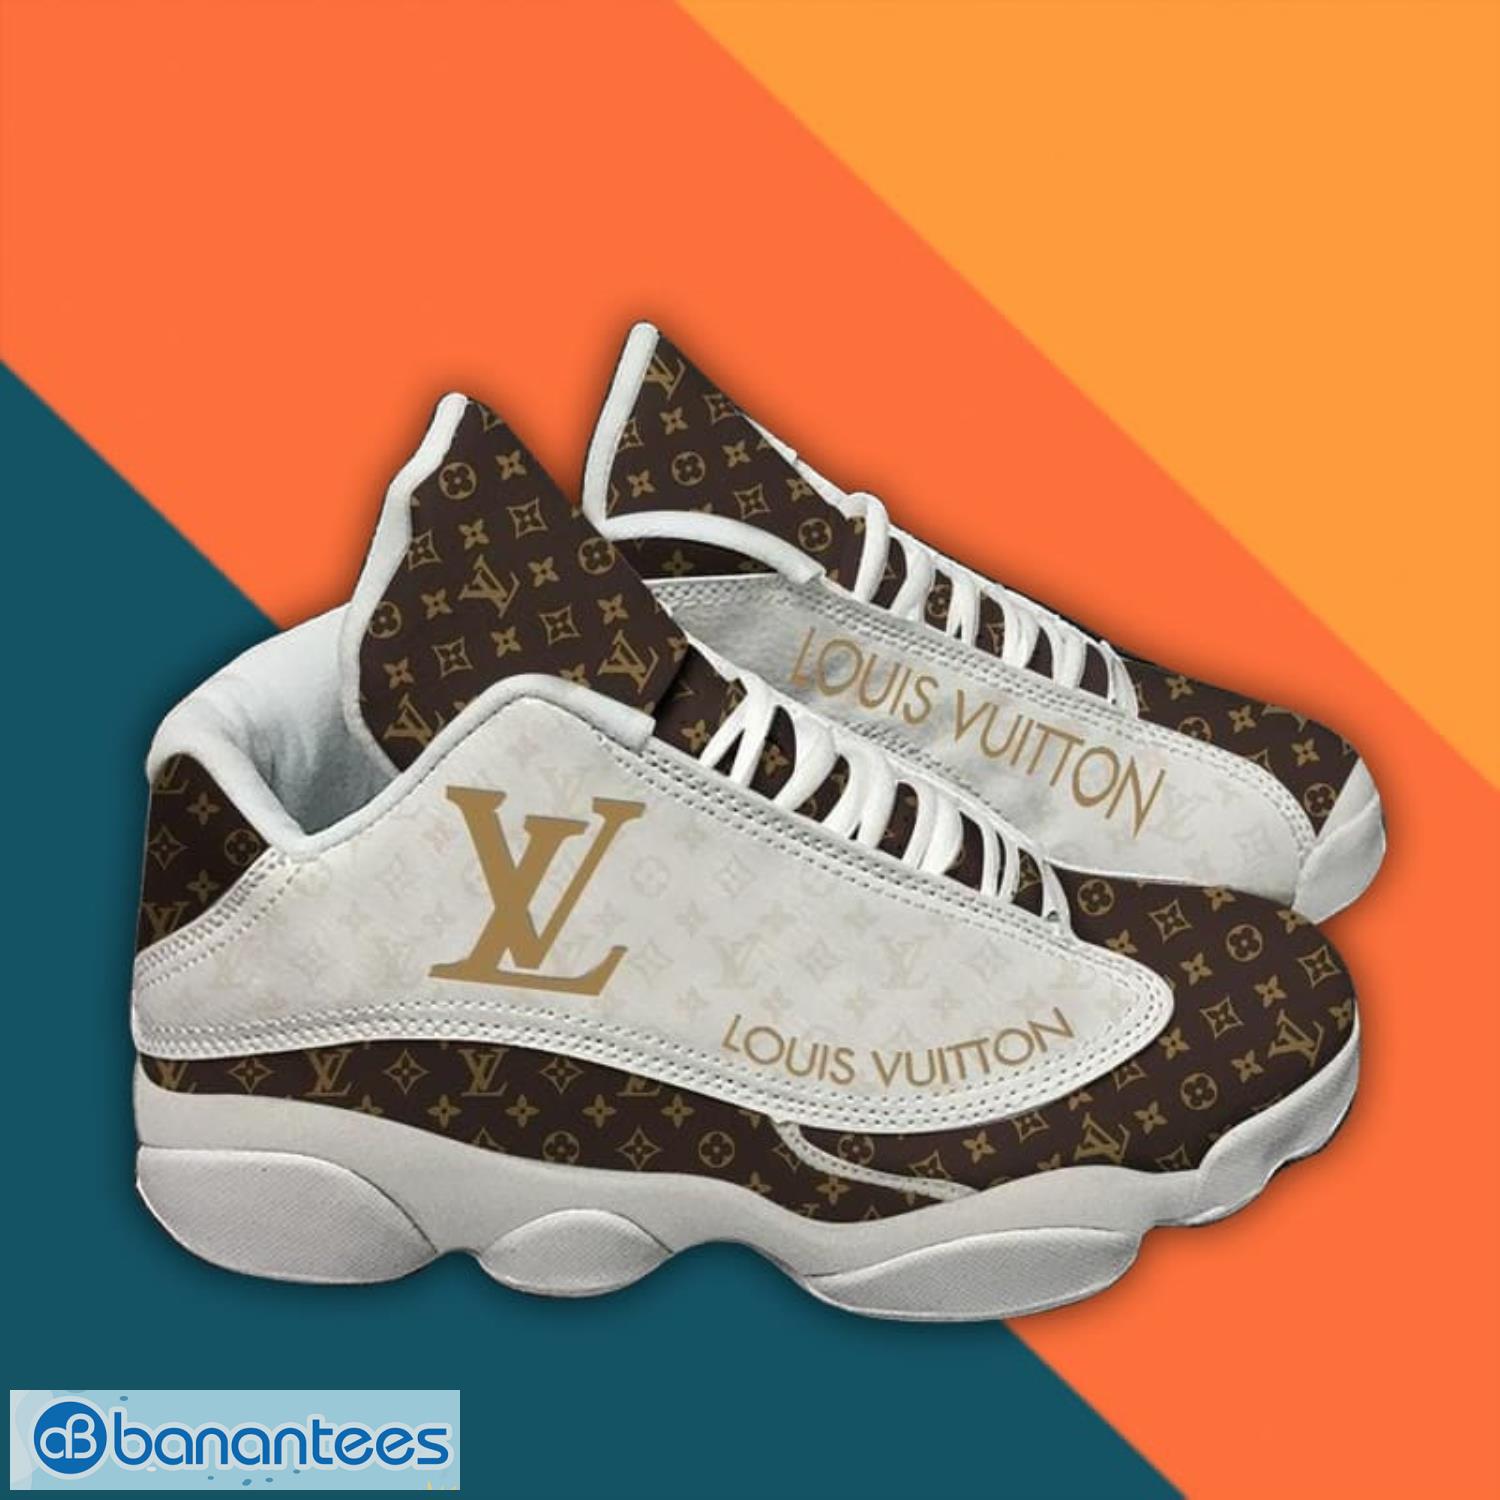 Louis Vuitton White And Brown Air Jordan 13 Sneaker Shoes Product Photo 1